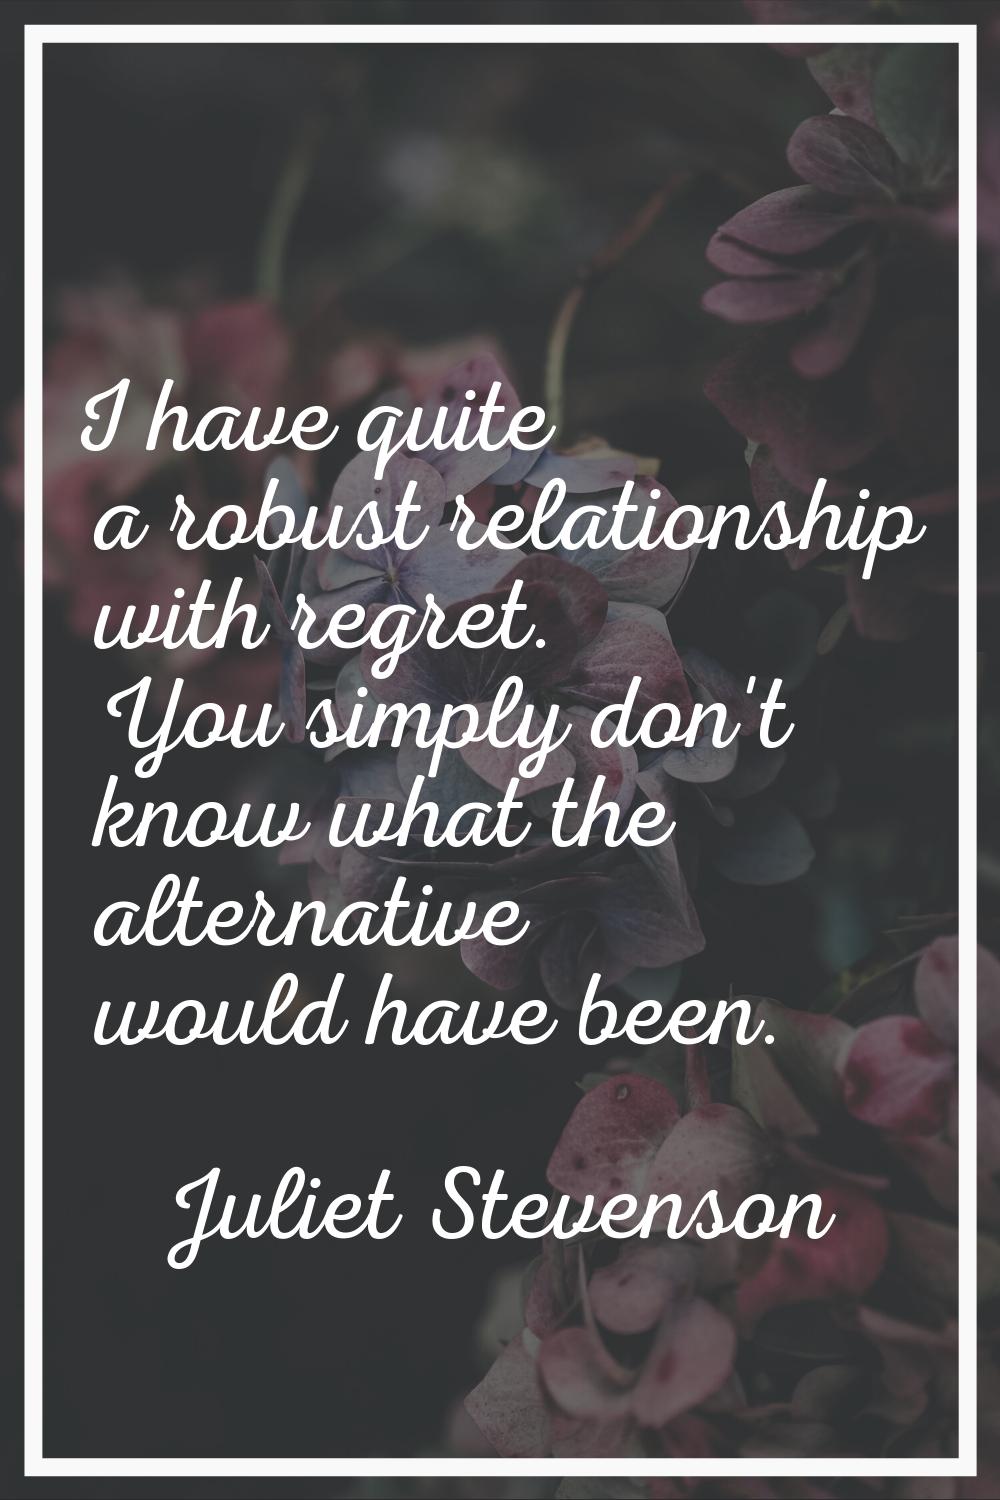 I have quite a robust relationship with regret. You simply don't know what the alternative would ha